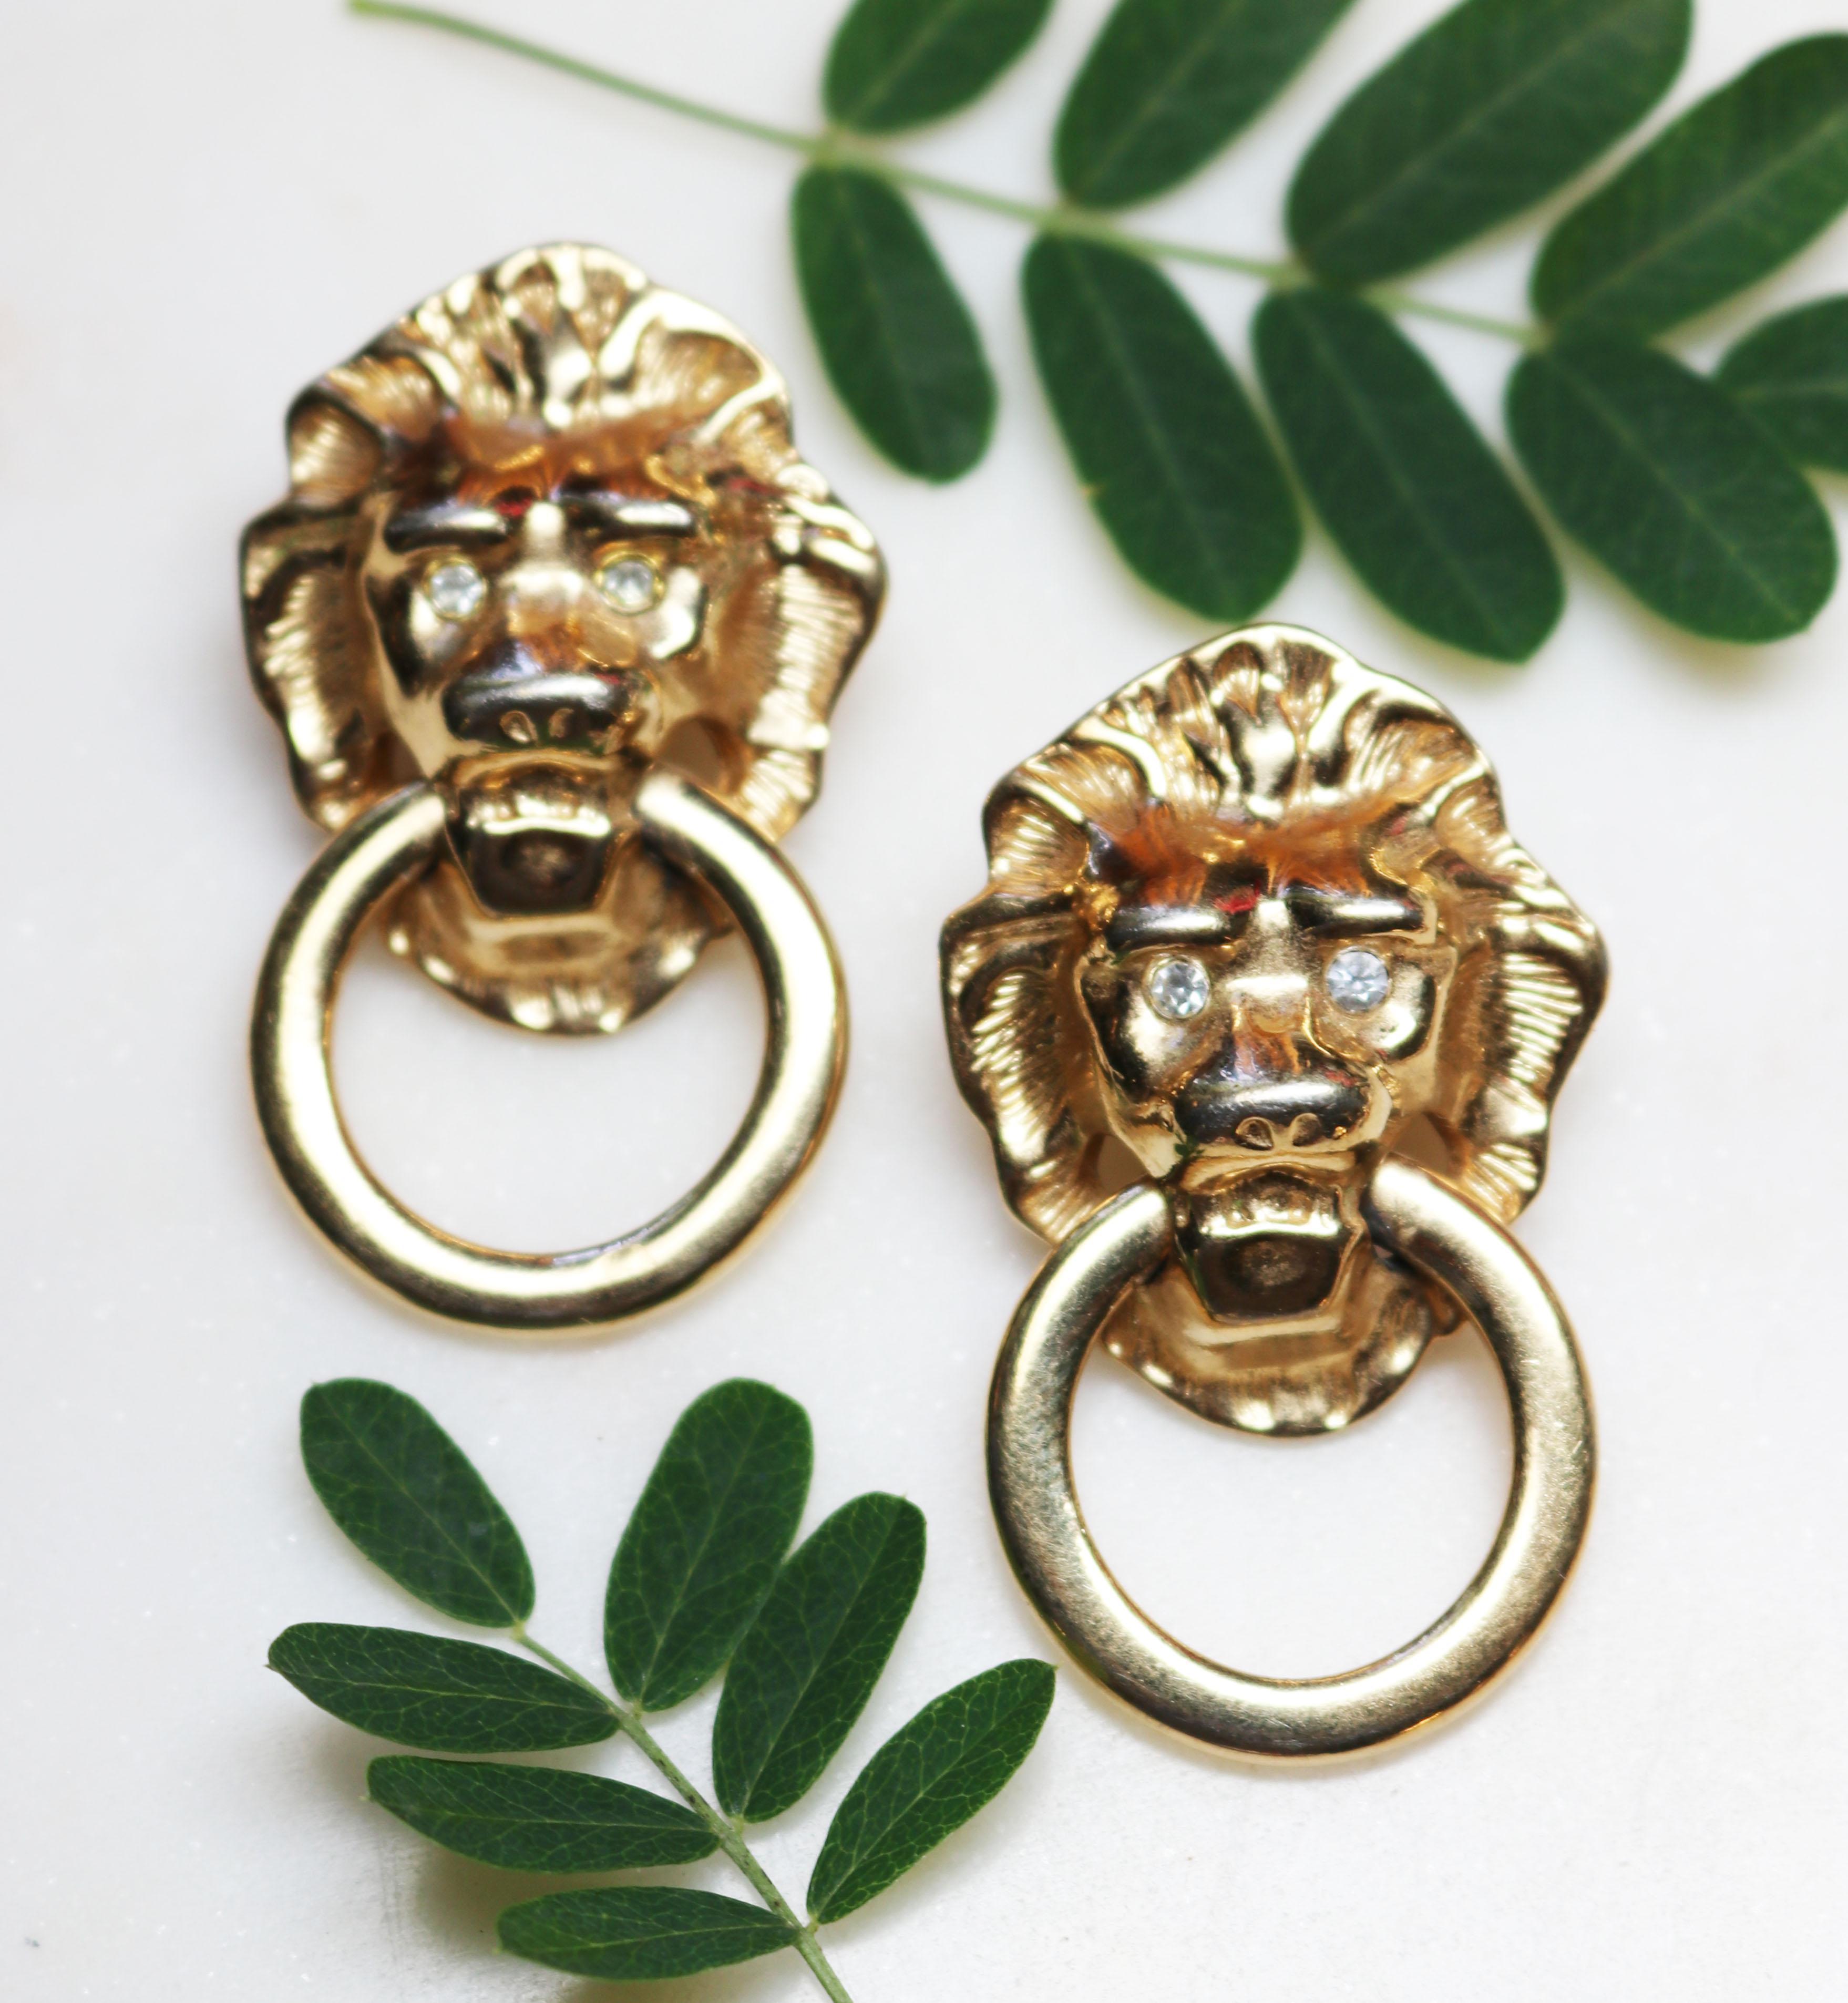 Kenneth Jay Lane Lion's Head Doorknocker Earrings In Excellent Condition For Sale In Mastic Beach, NY